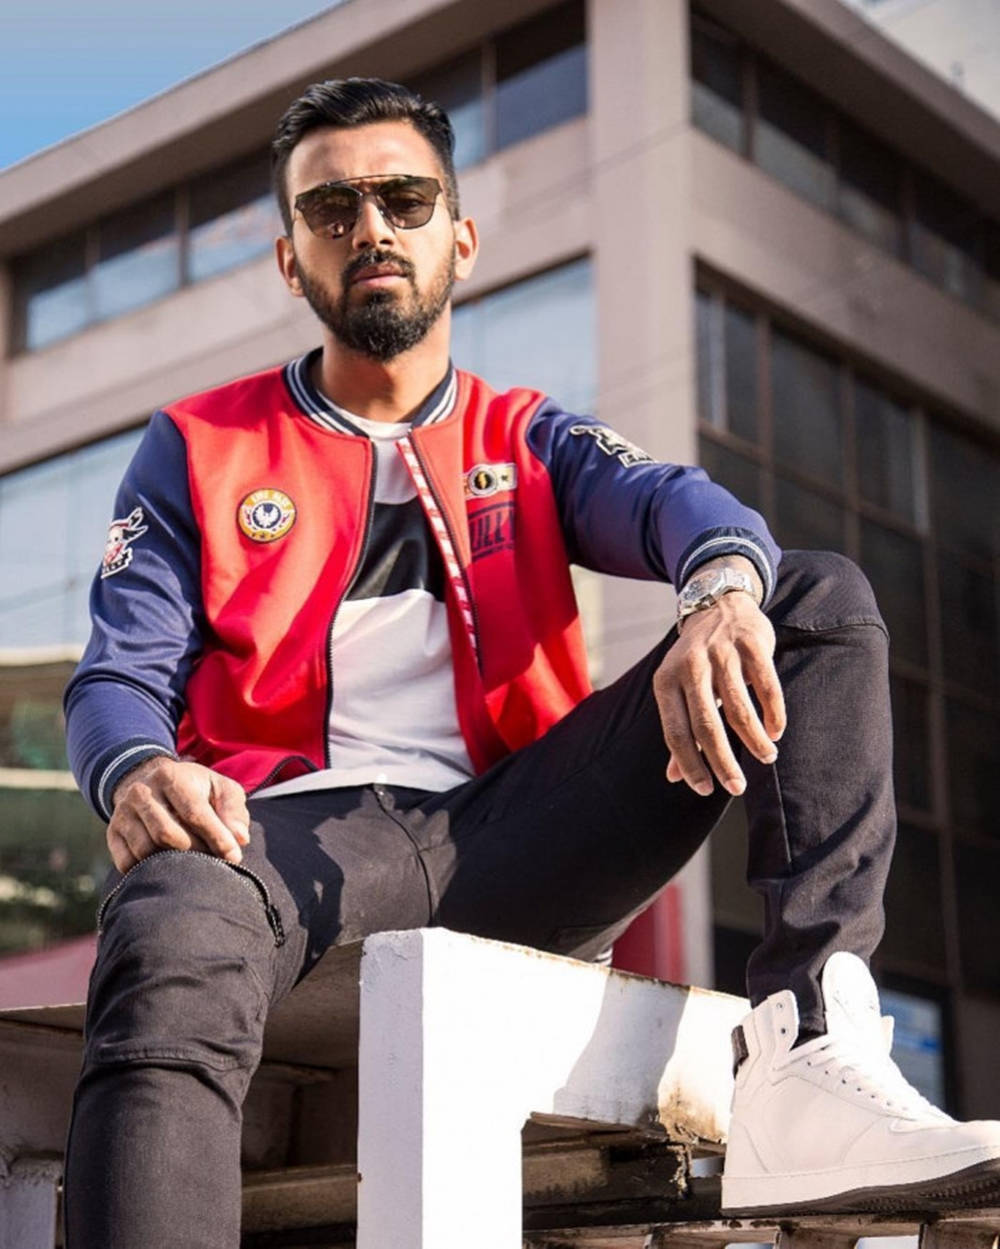 Top 999+ Kl Rahul Wallpapers Full HD, 4K✅Free to Use